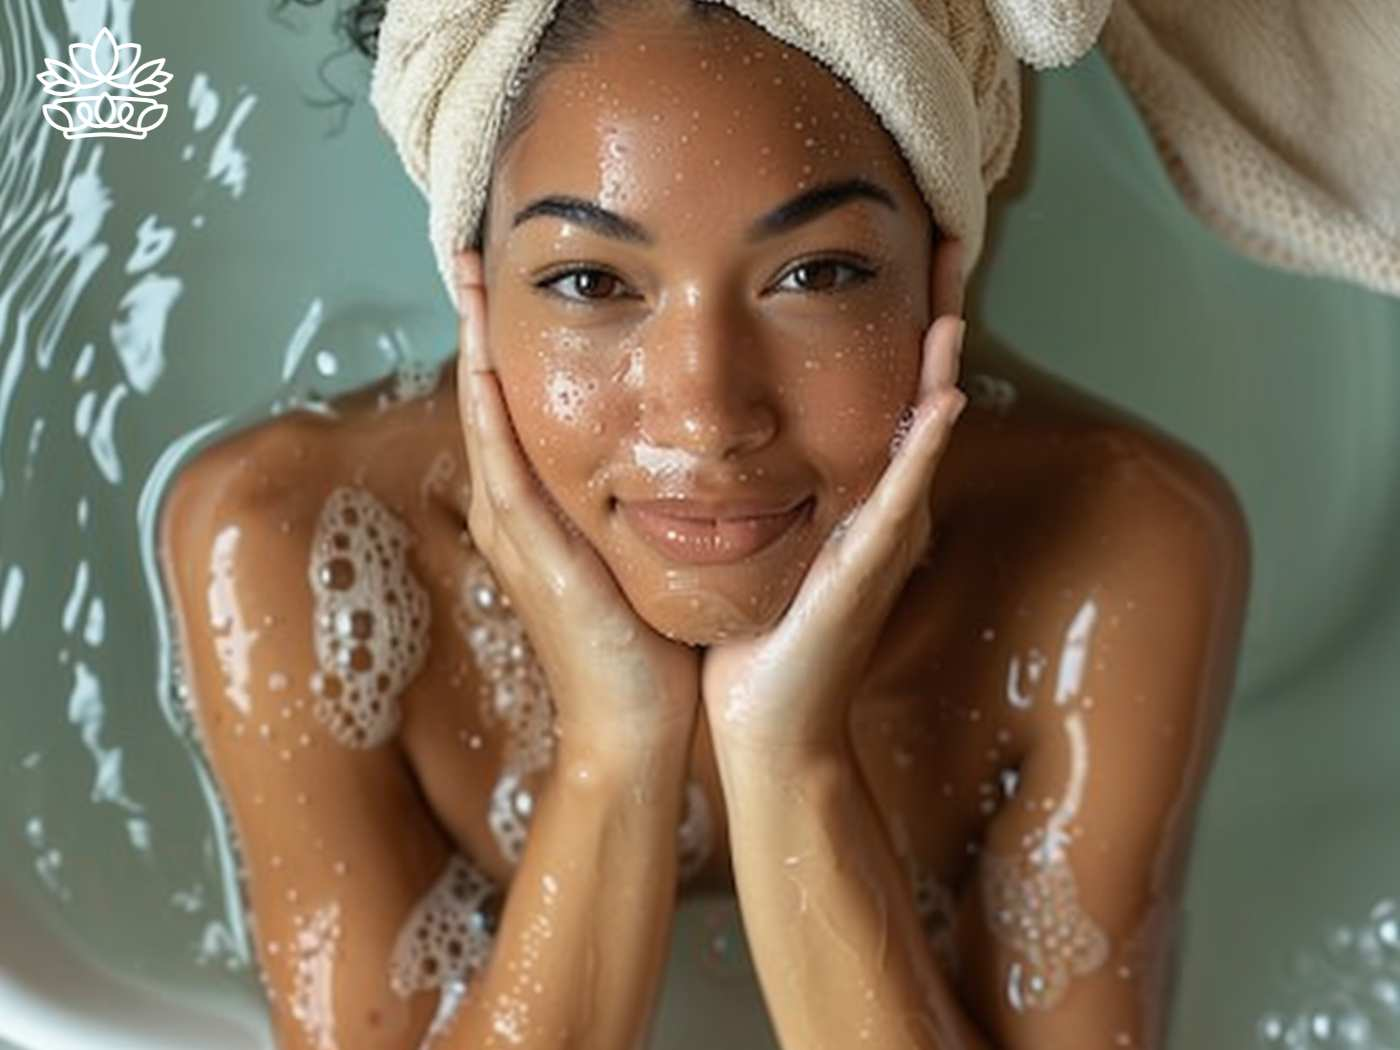 A serene young woman enjoying a luxurious bubble bath, with a head towel wrap, and a content smile, indicative of the pampering self-care experiences from Fabulous Flowers and Gifts.